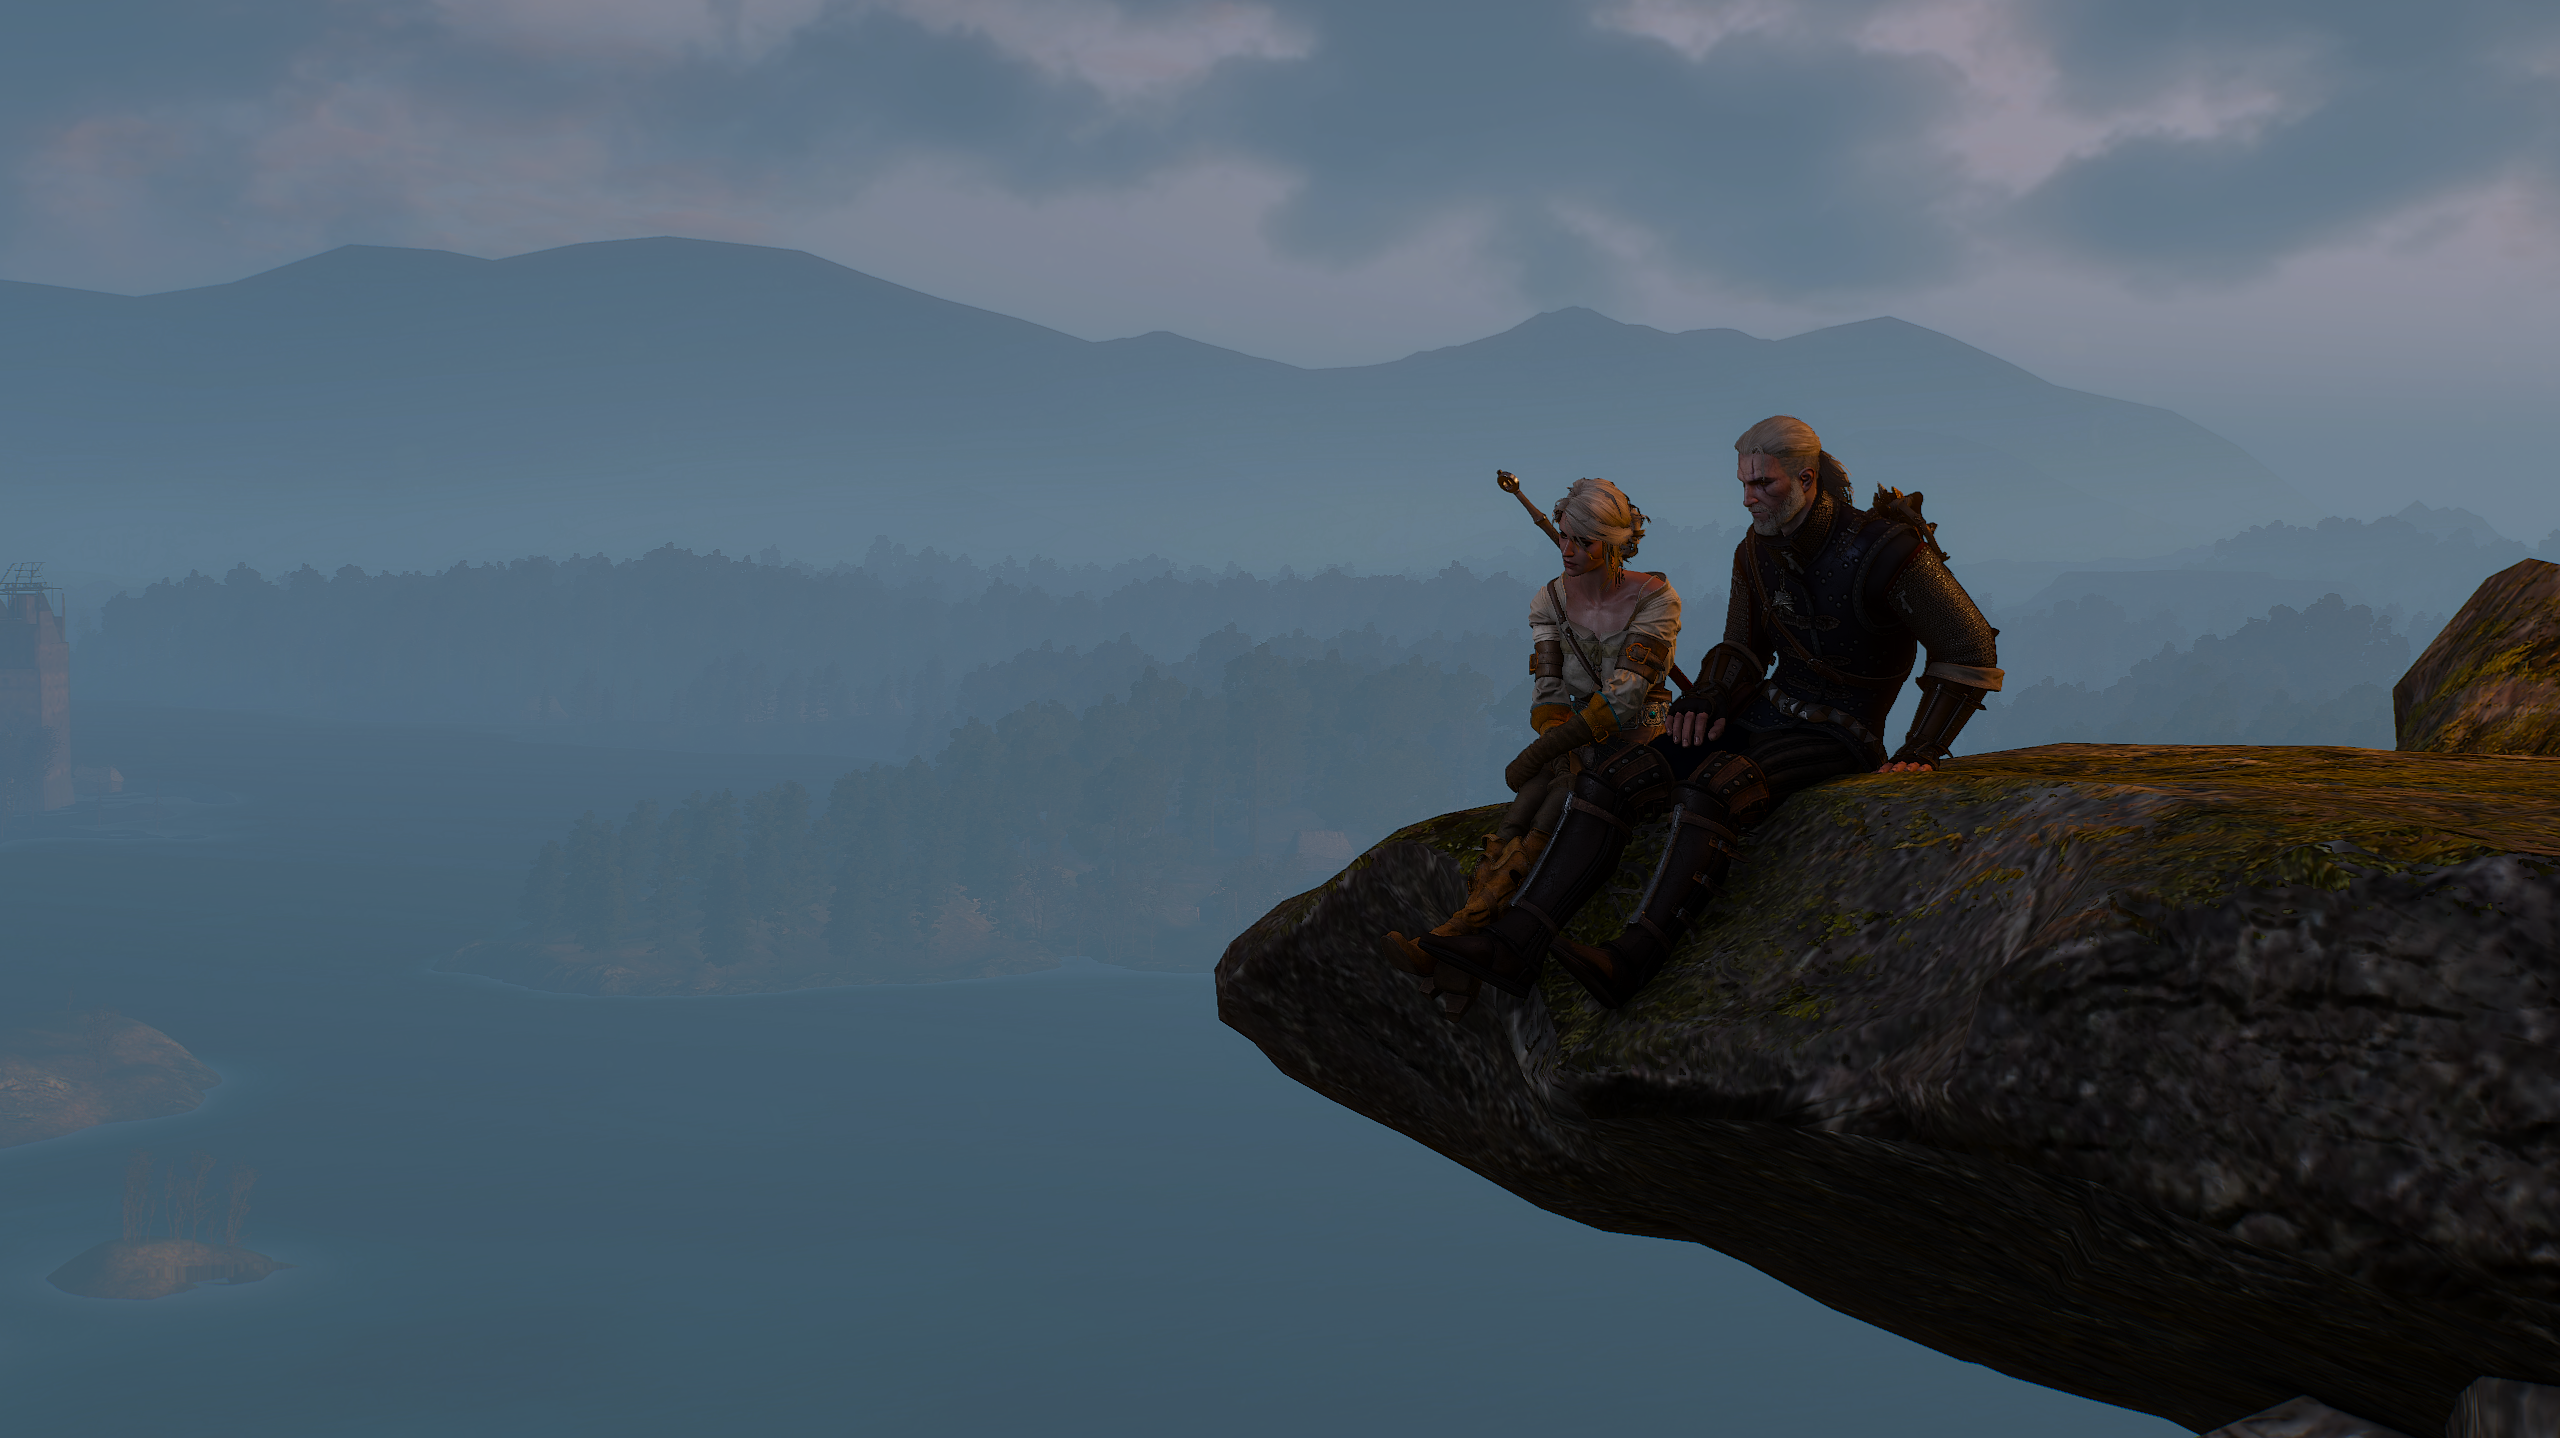 PC Gaming The Witcher The Witcher 3 Wild Hunt Landscape Cirilla Ciri Geralt Of Rivia Sea Mountains 2560x1438